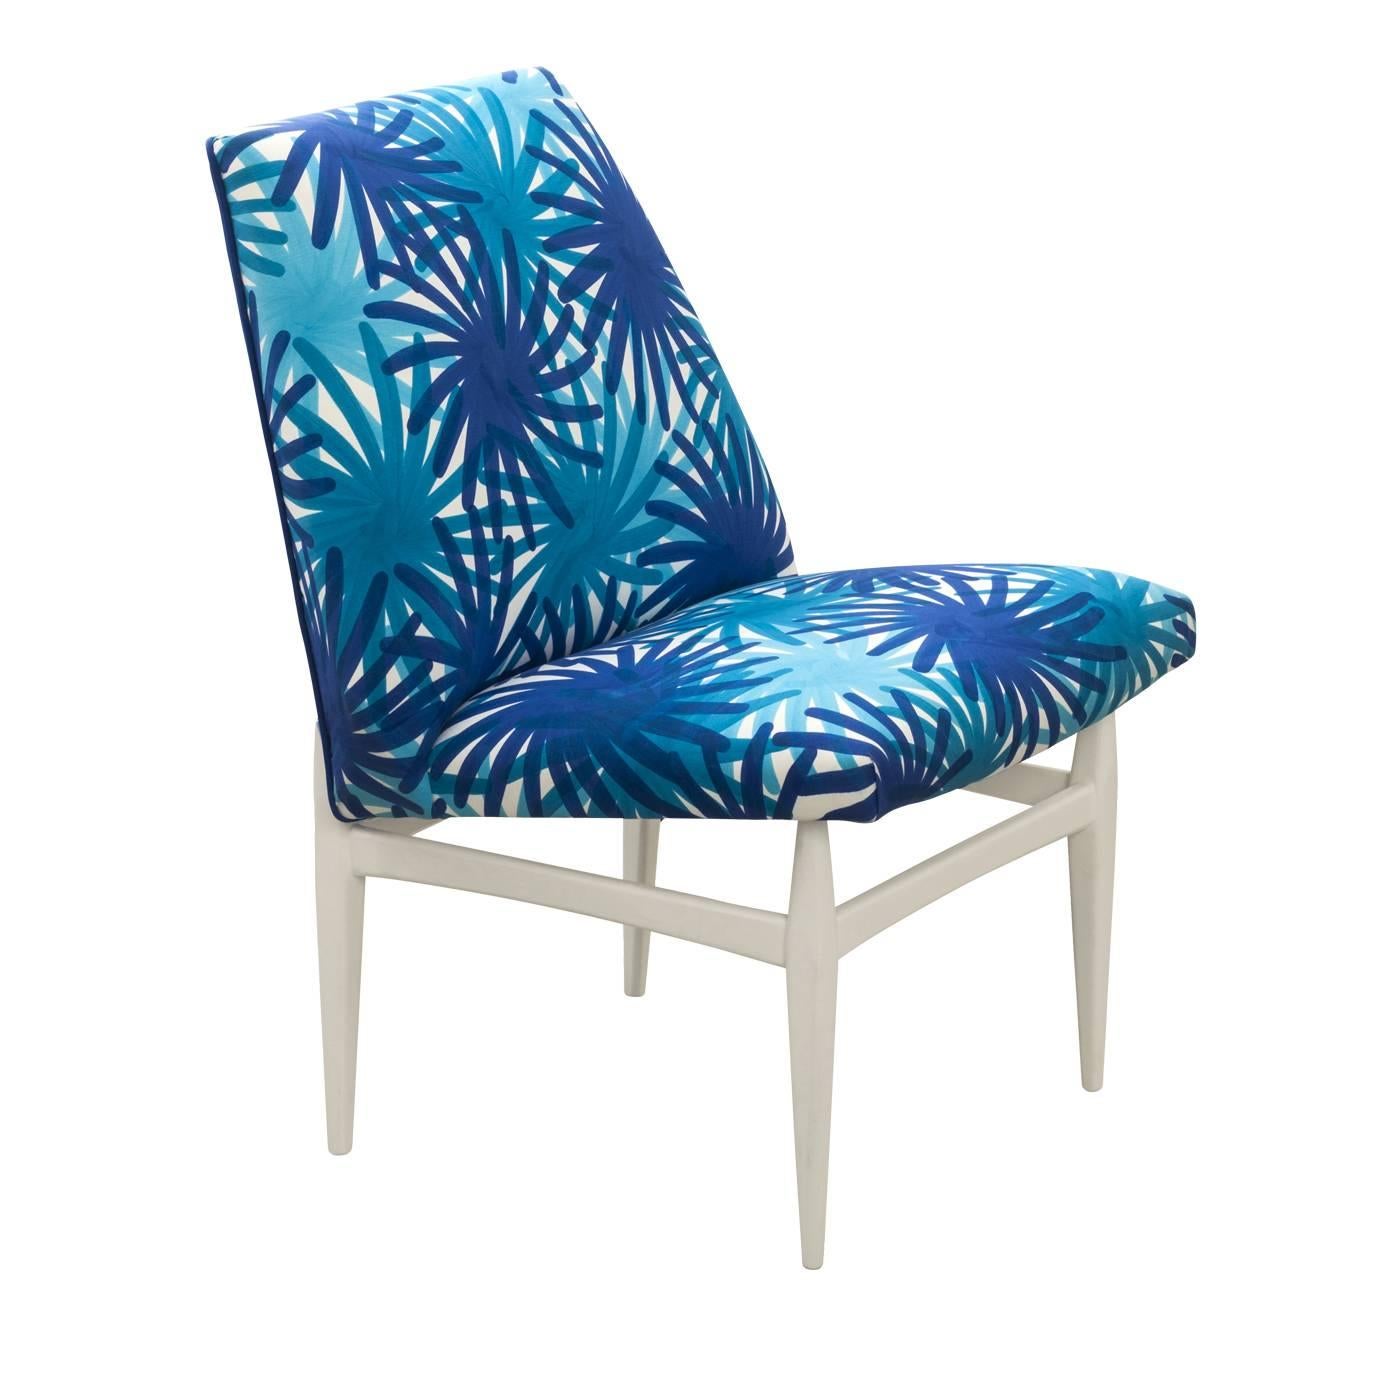 This elegant chair has a wood structure finished in white enamel. Its seat and back are covered in 100% cotton decorated using the pigment printing technique with a pattern of blue and turquoise fireworks.